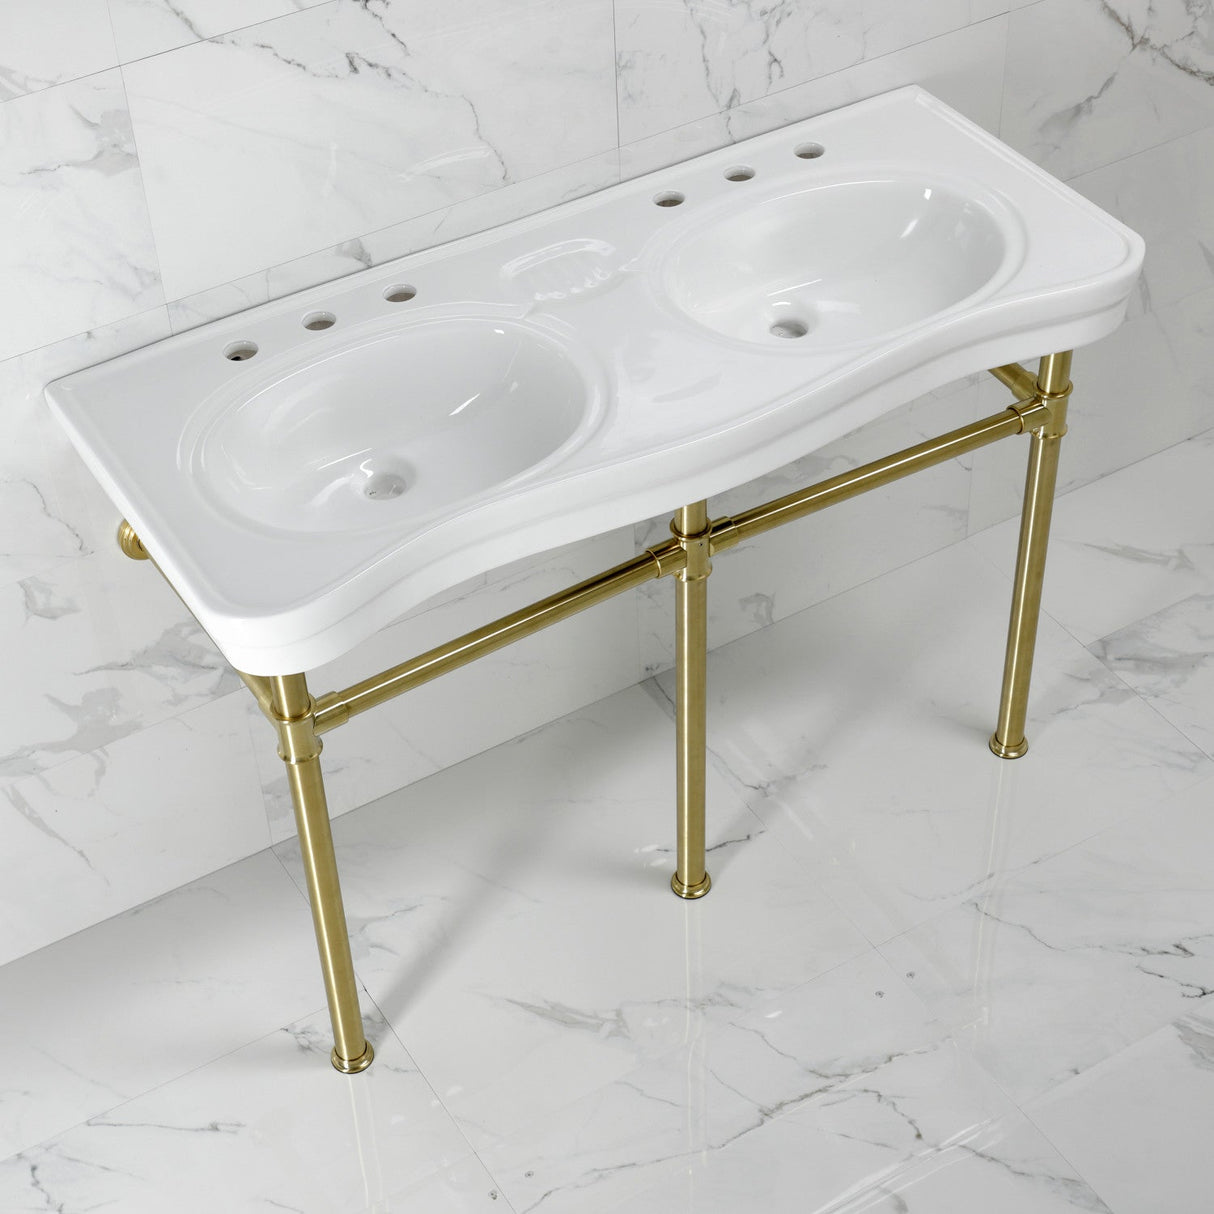 Imperial VPBT14887ST 47-Inch Ceramic Double Bowl Console Sink with Stainless Steel Legs, White/Brushed Brass